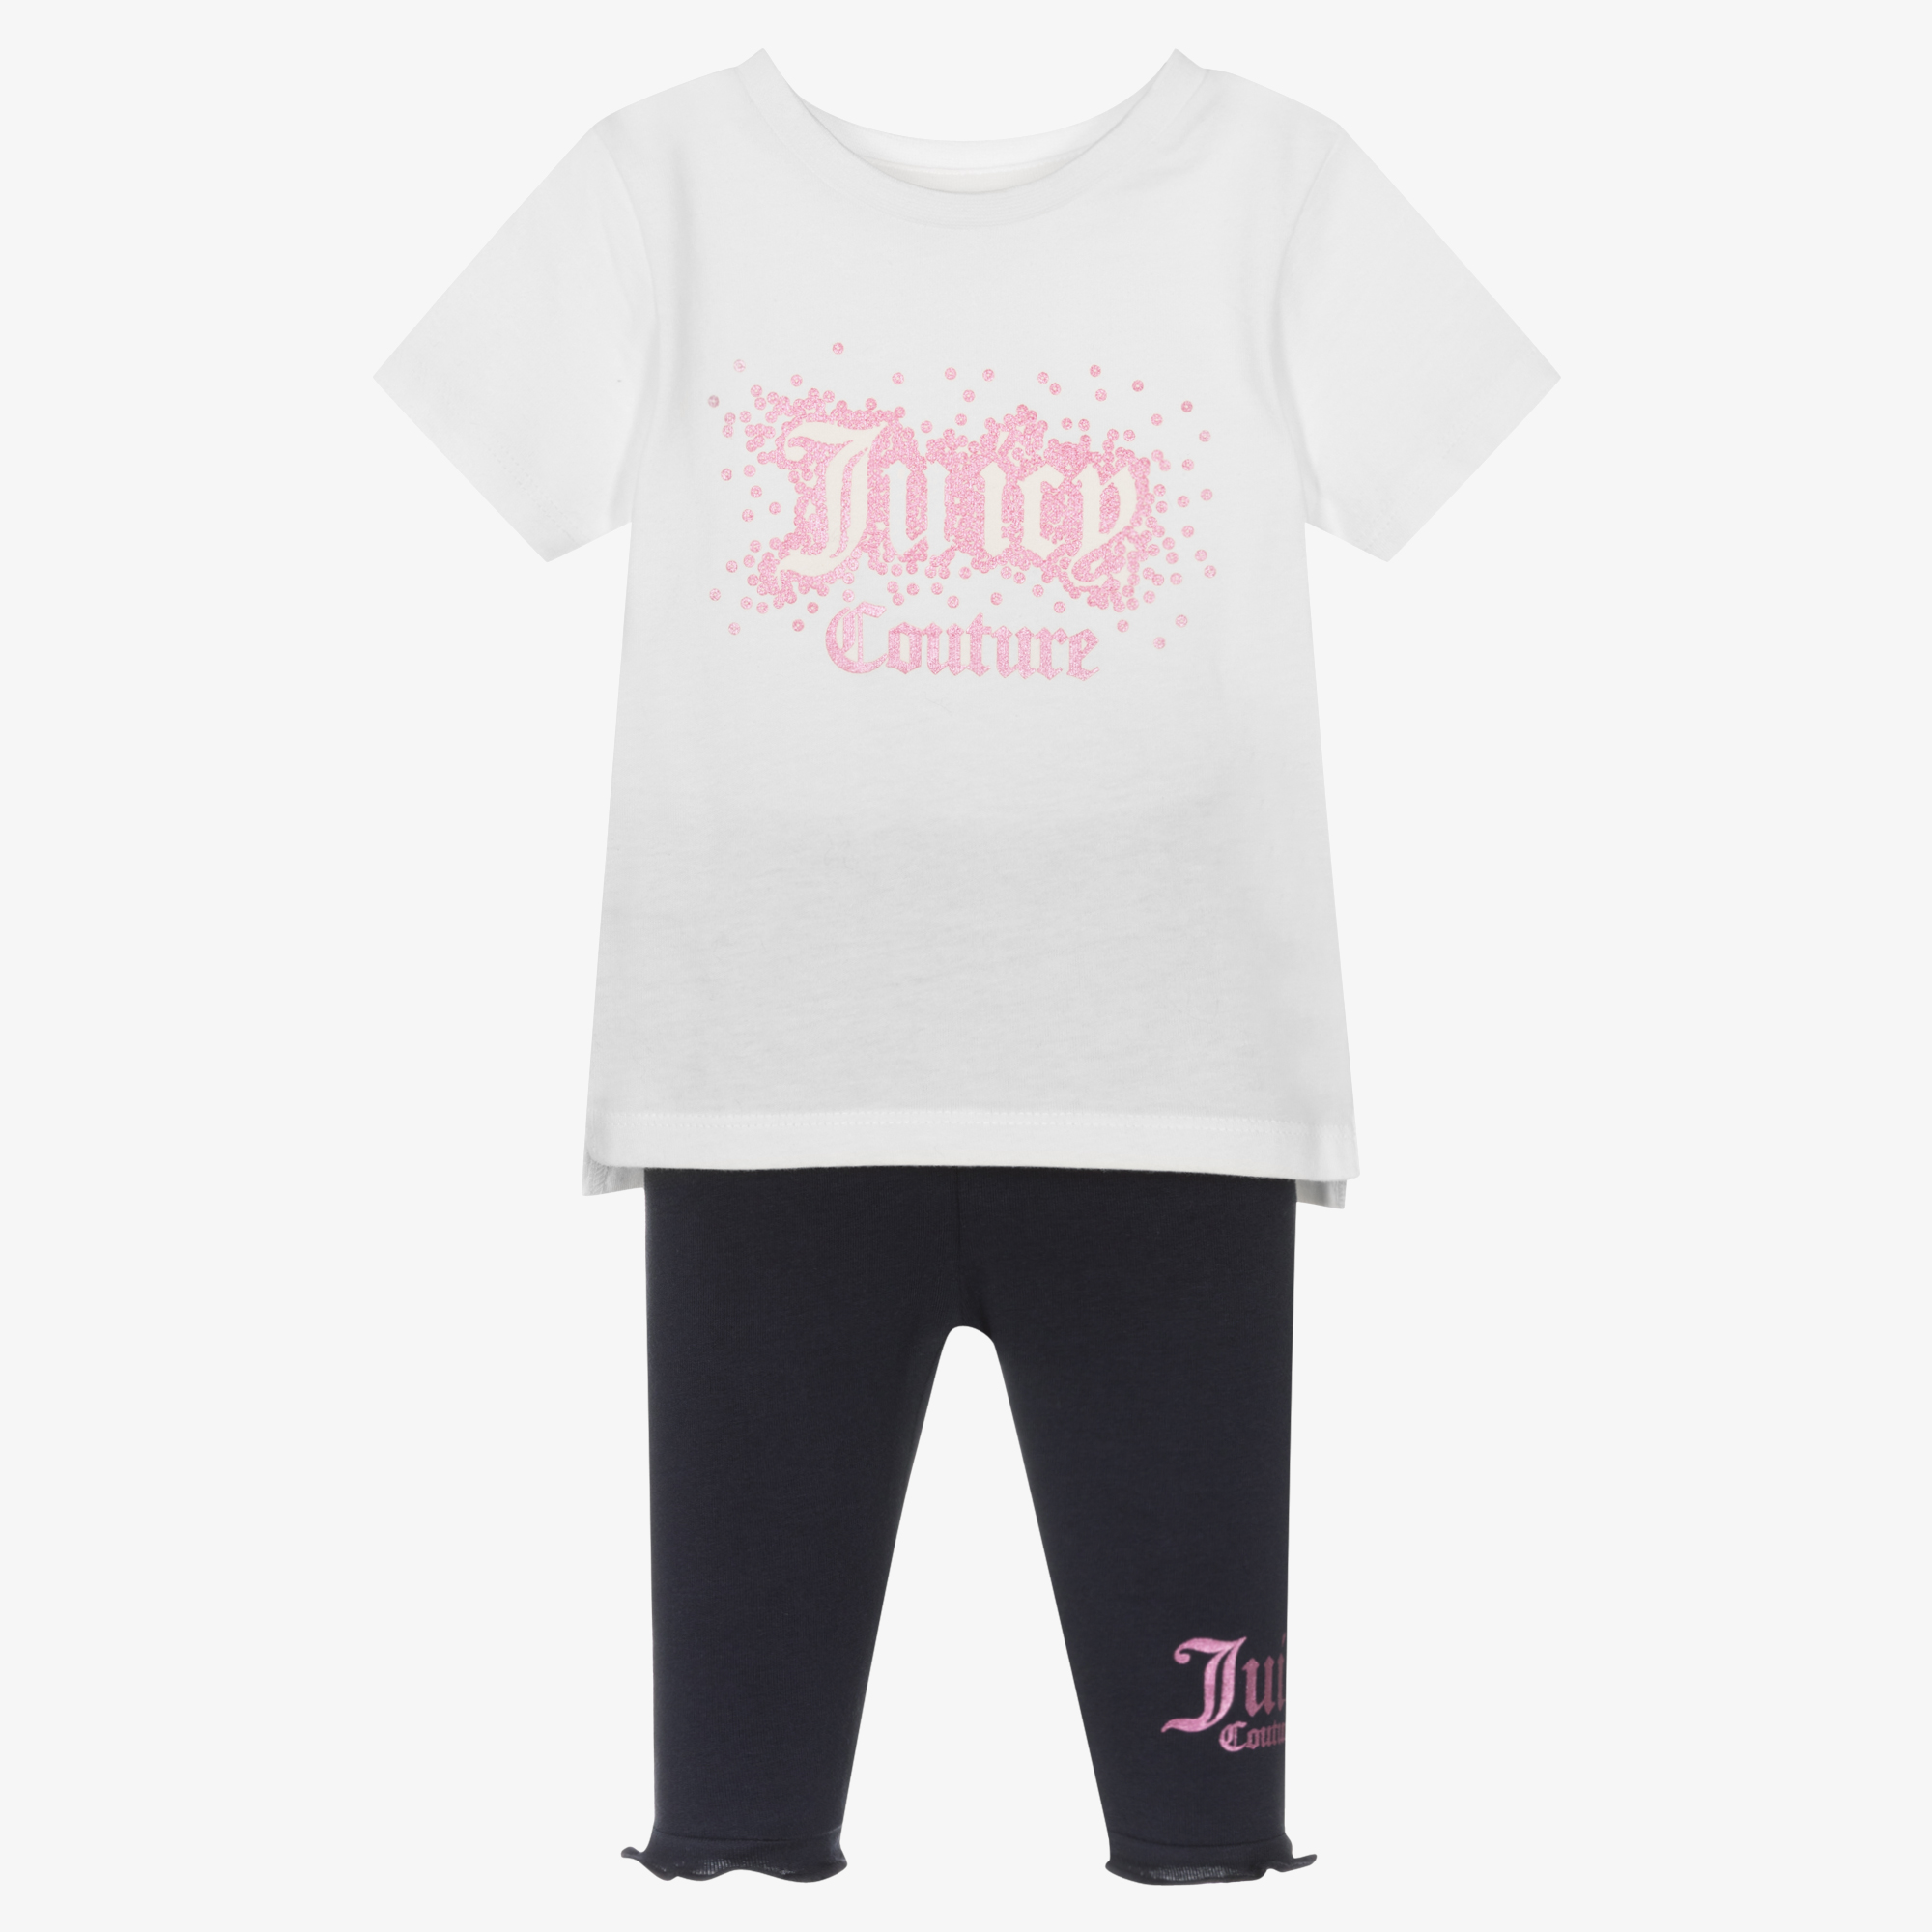 Juicy Couture - Baby Girls White & Blue Cotton Leggings Set